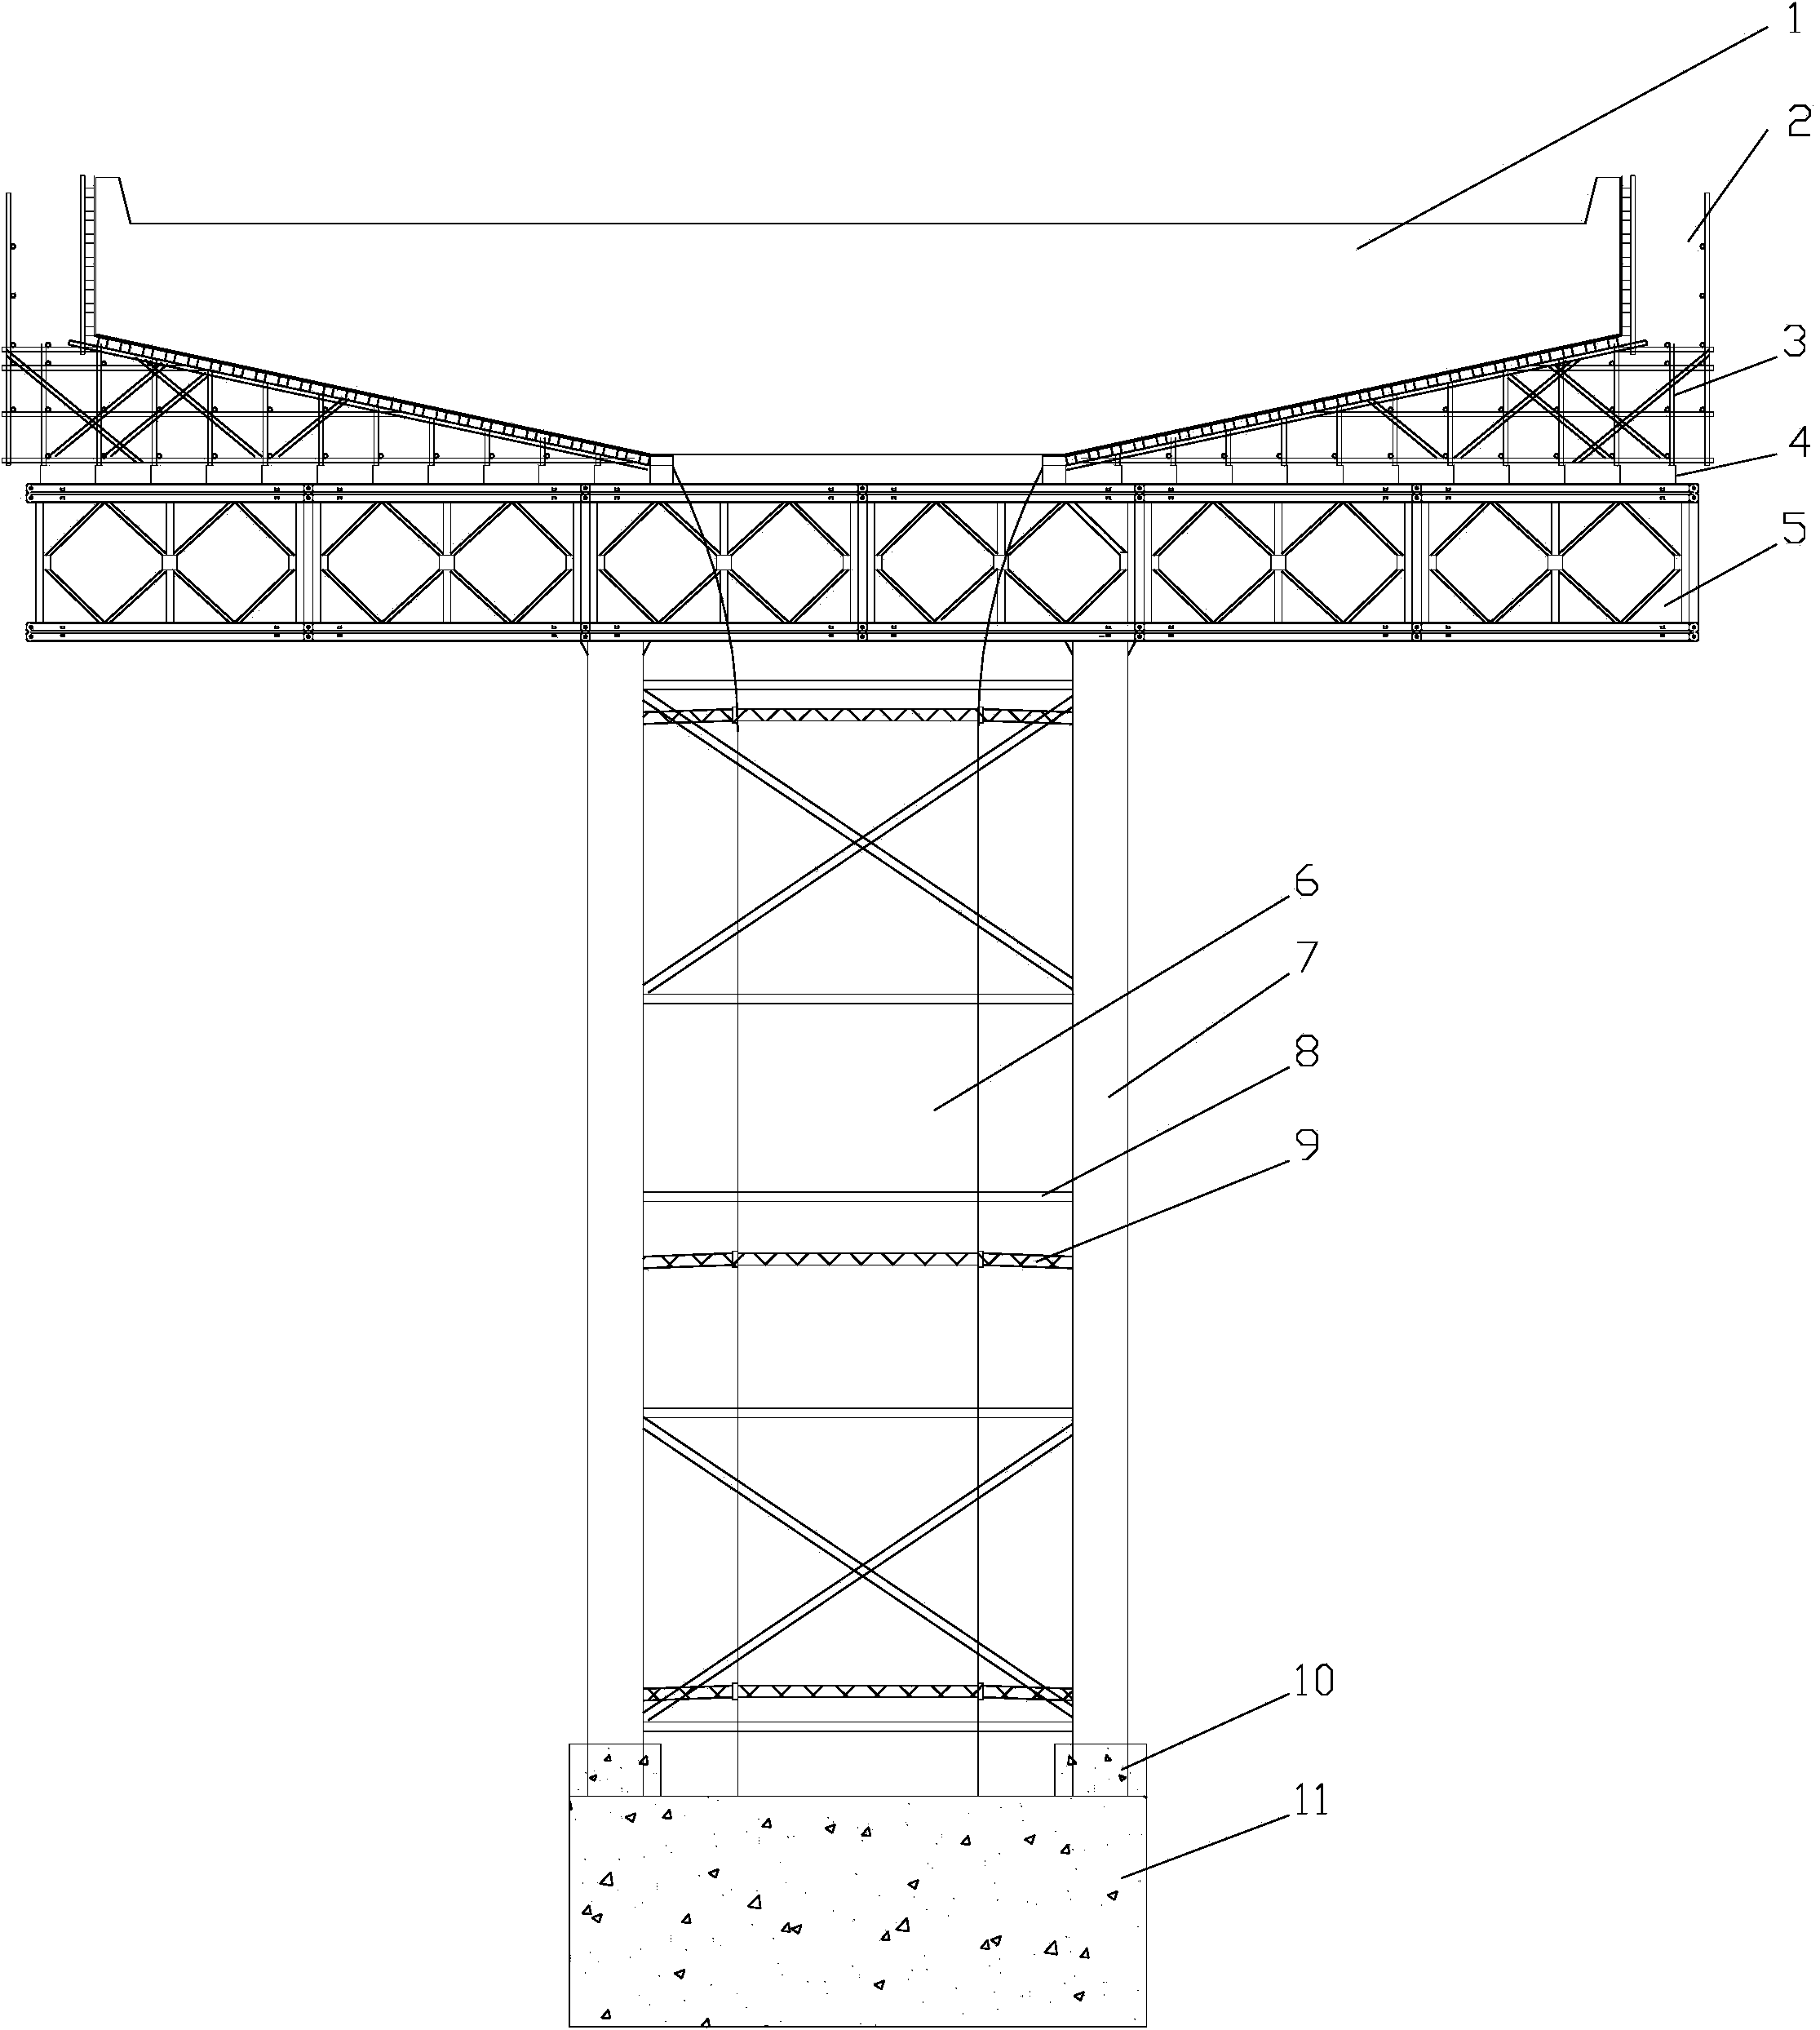 Integrated construction method of support of large cantilevered capping beam and vertical column